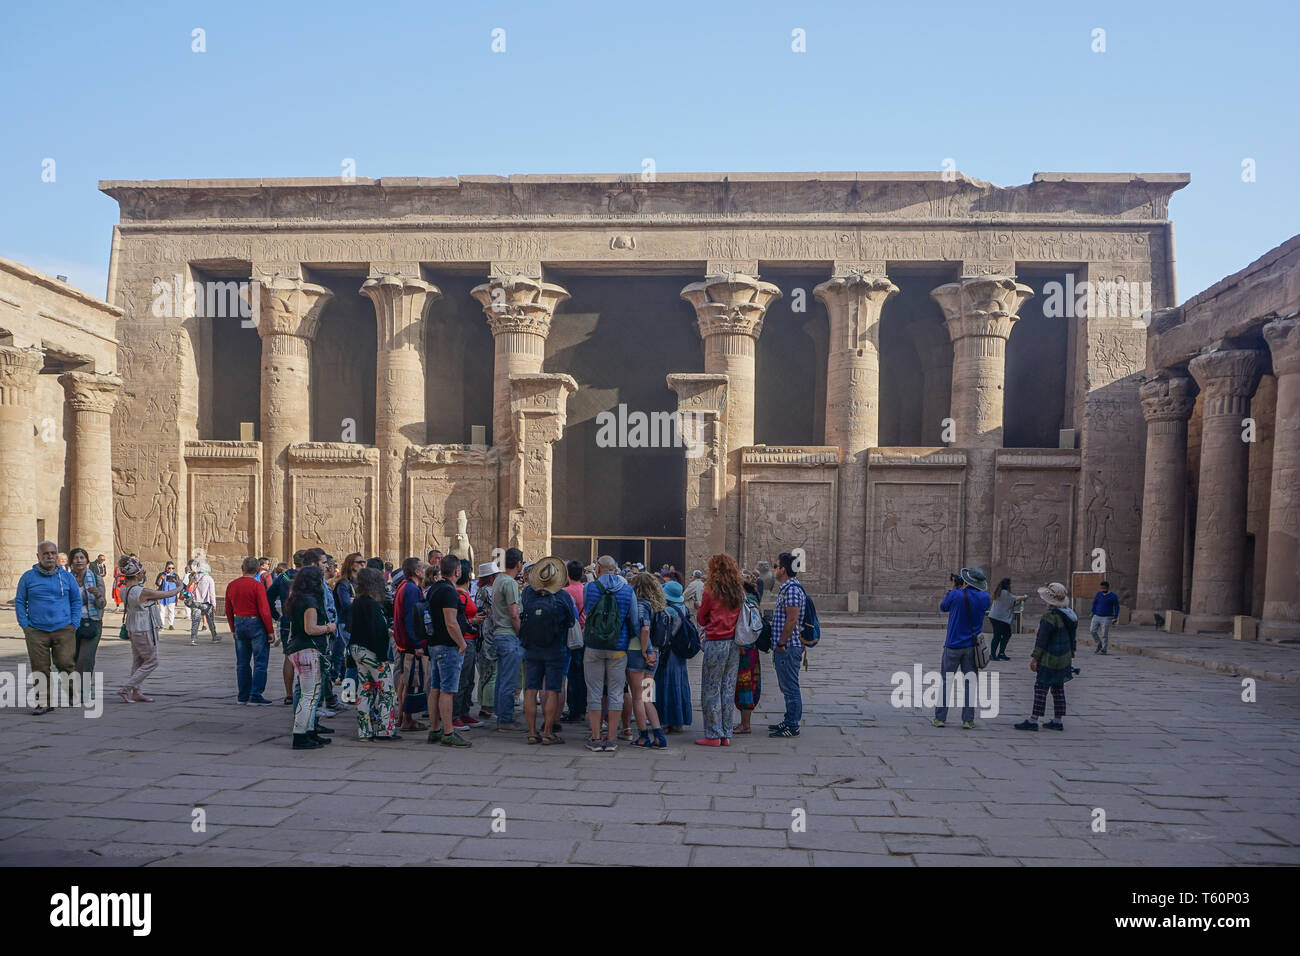 Edfu, Egypt: Tourists listen to their guide in the courtyard of the temple of Edfu, the largest temple dedicated to Horus and Hathor of Dendera. Stock Photo